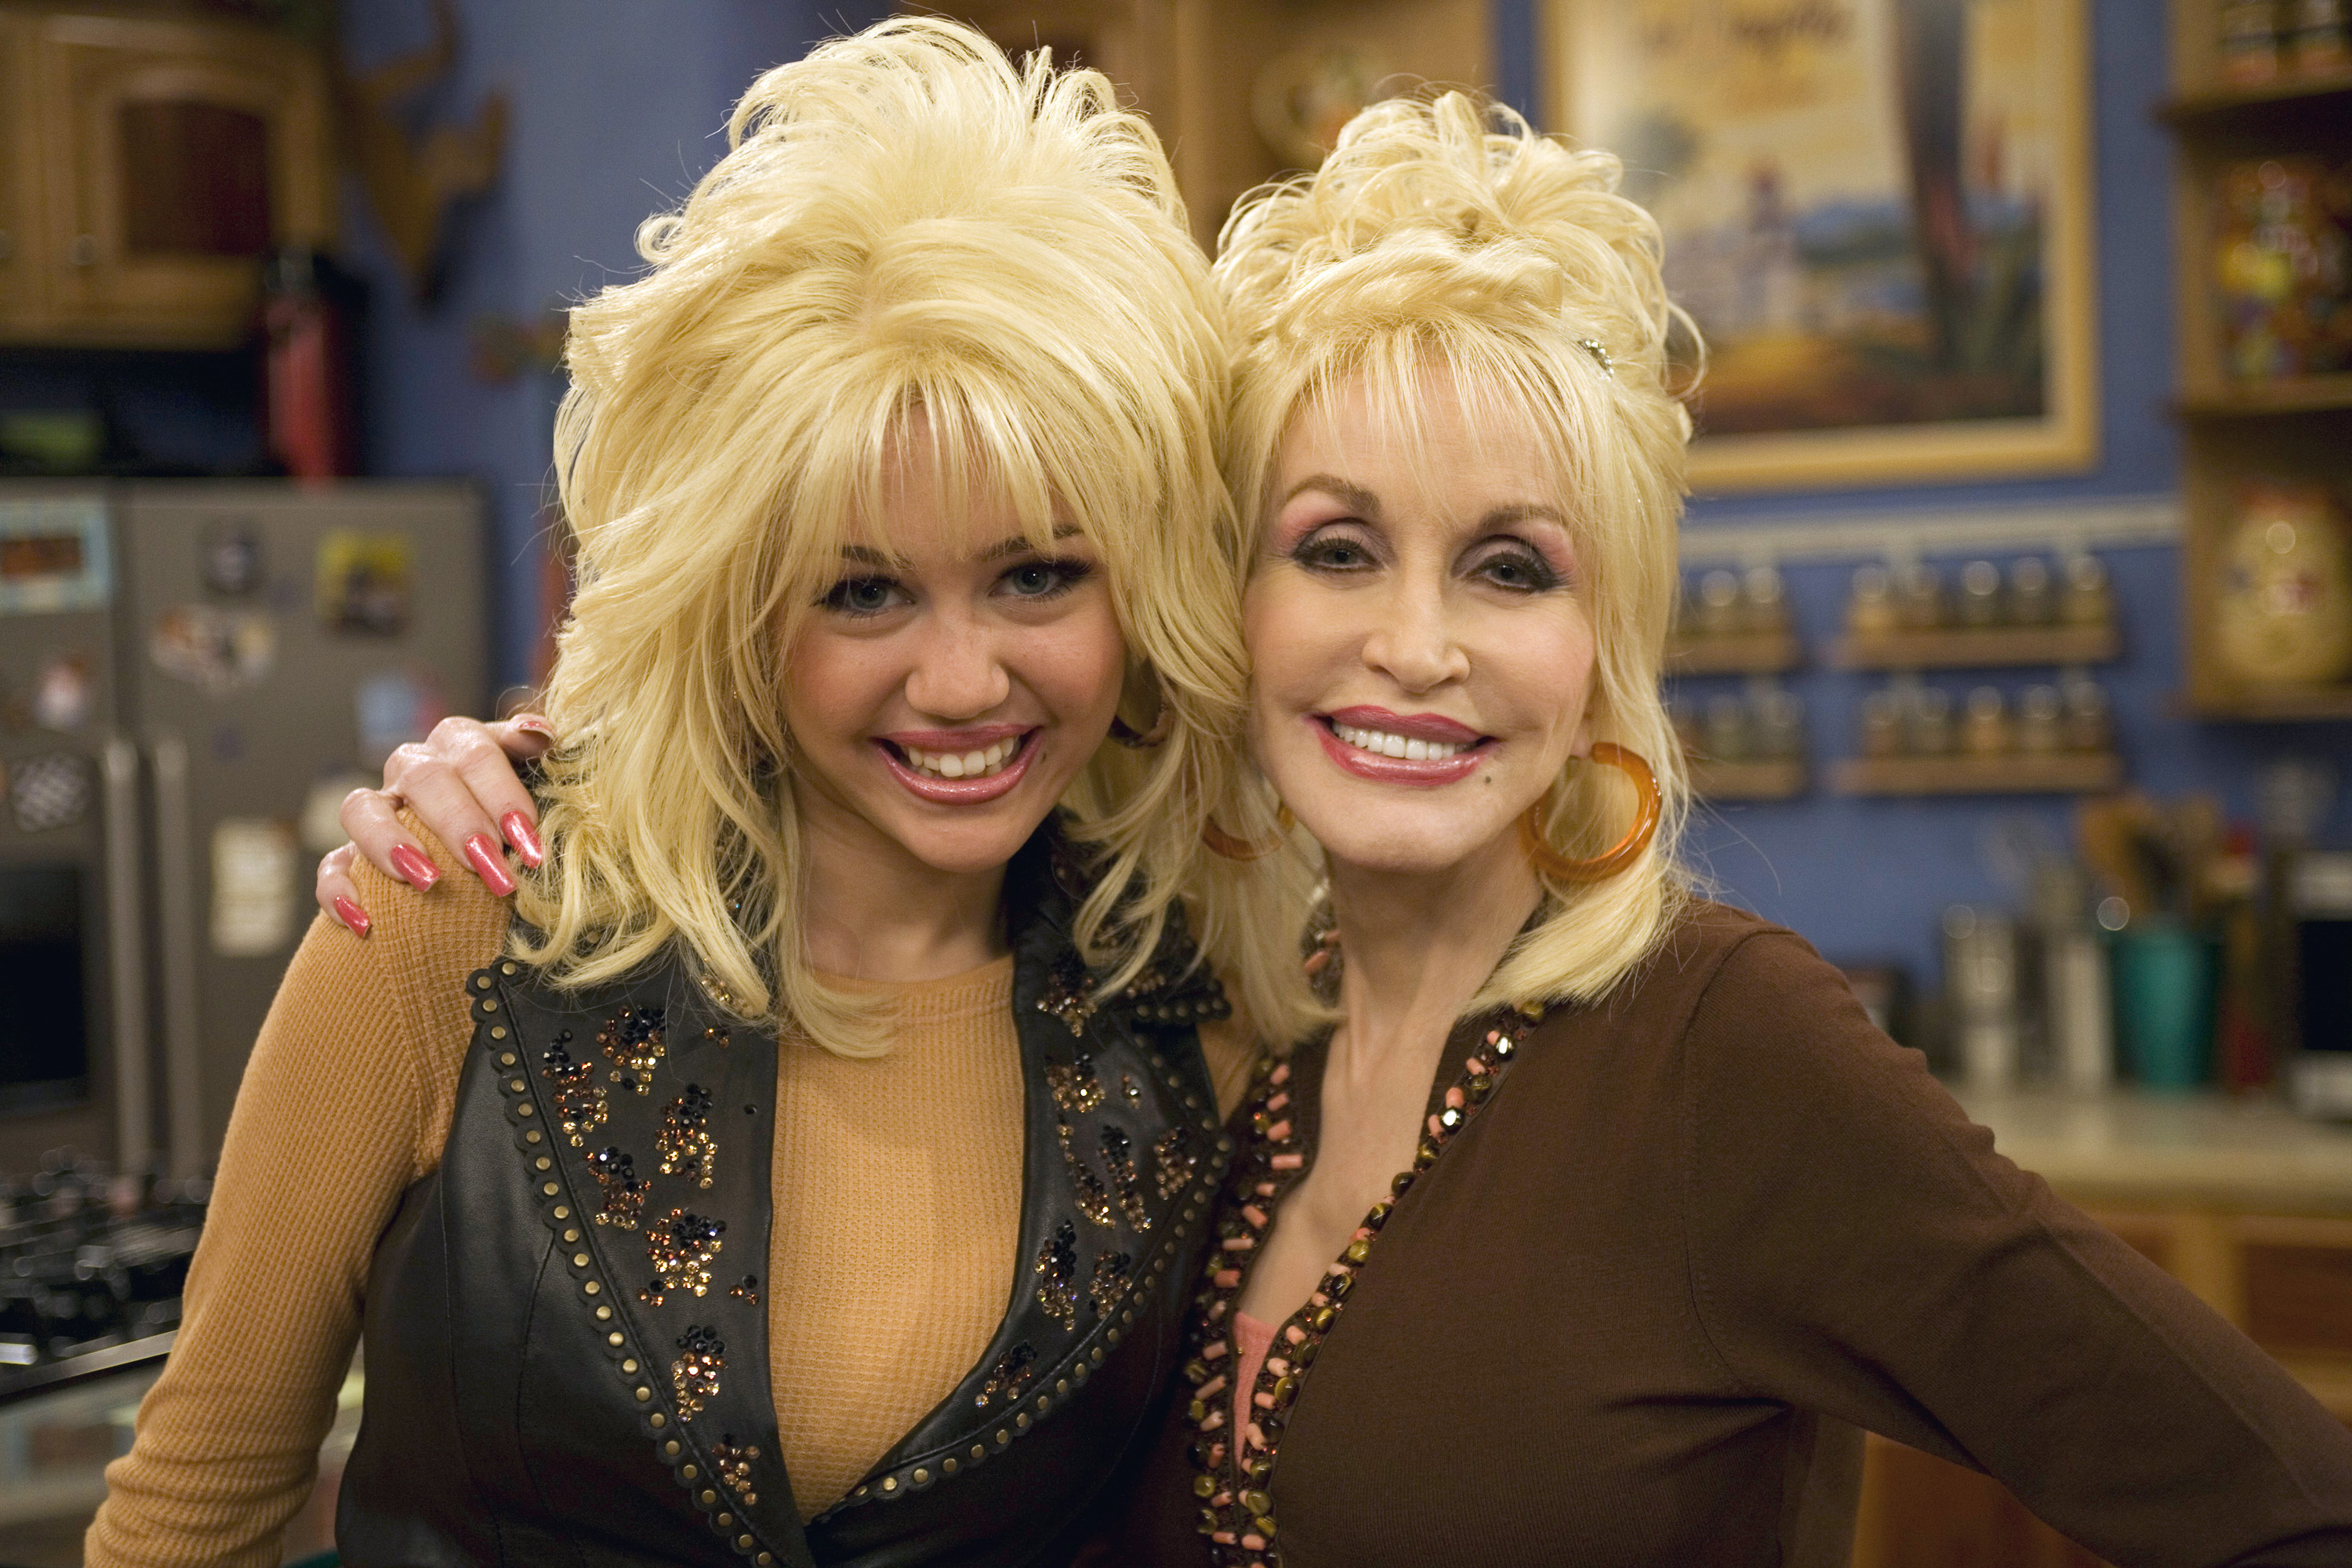 Miley Cyrus and Dolly Parton on "Hannah Montana" on May 31, 2007. | Source: Getty Images